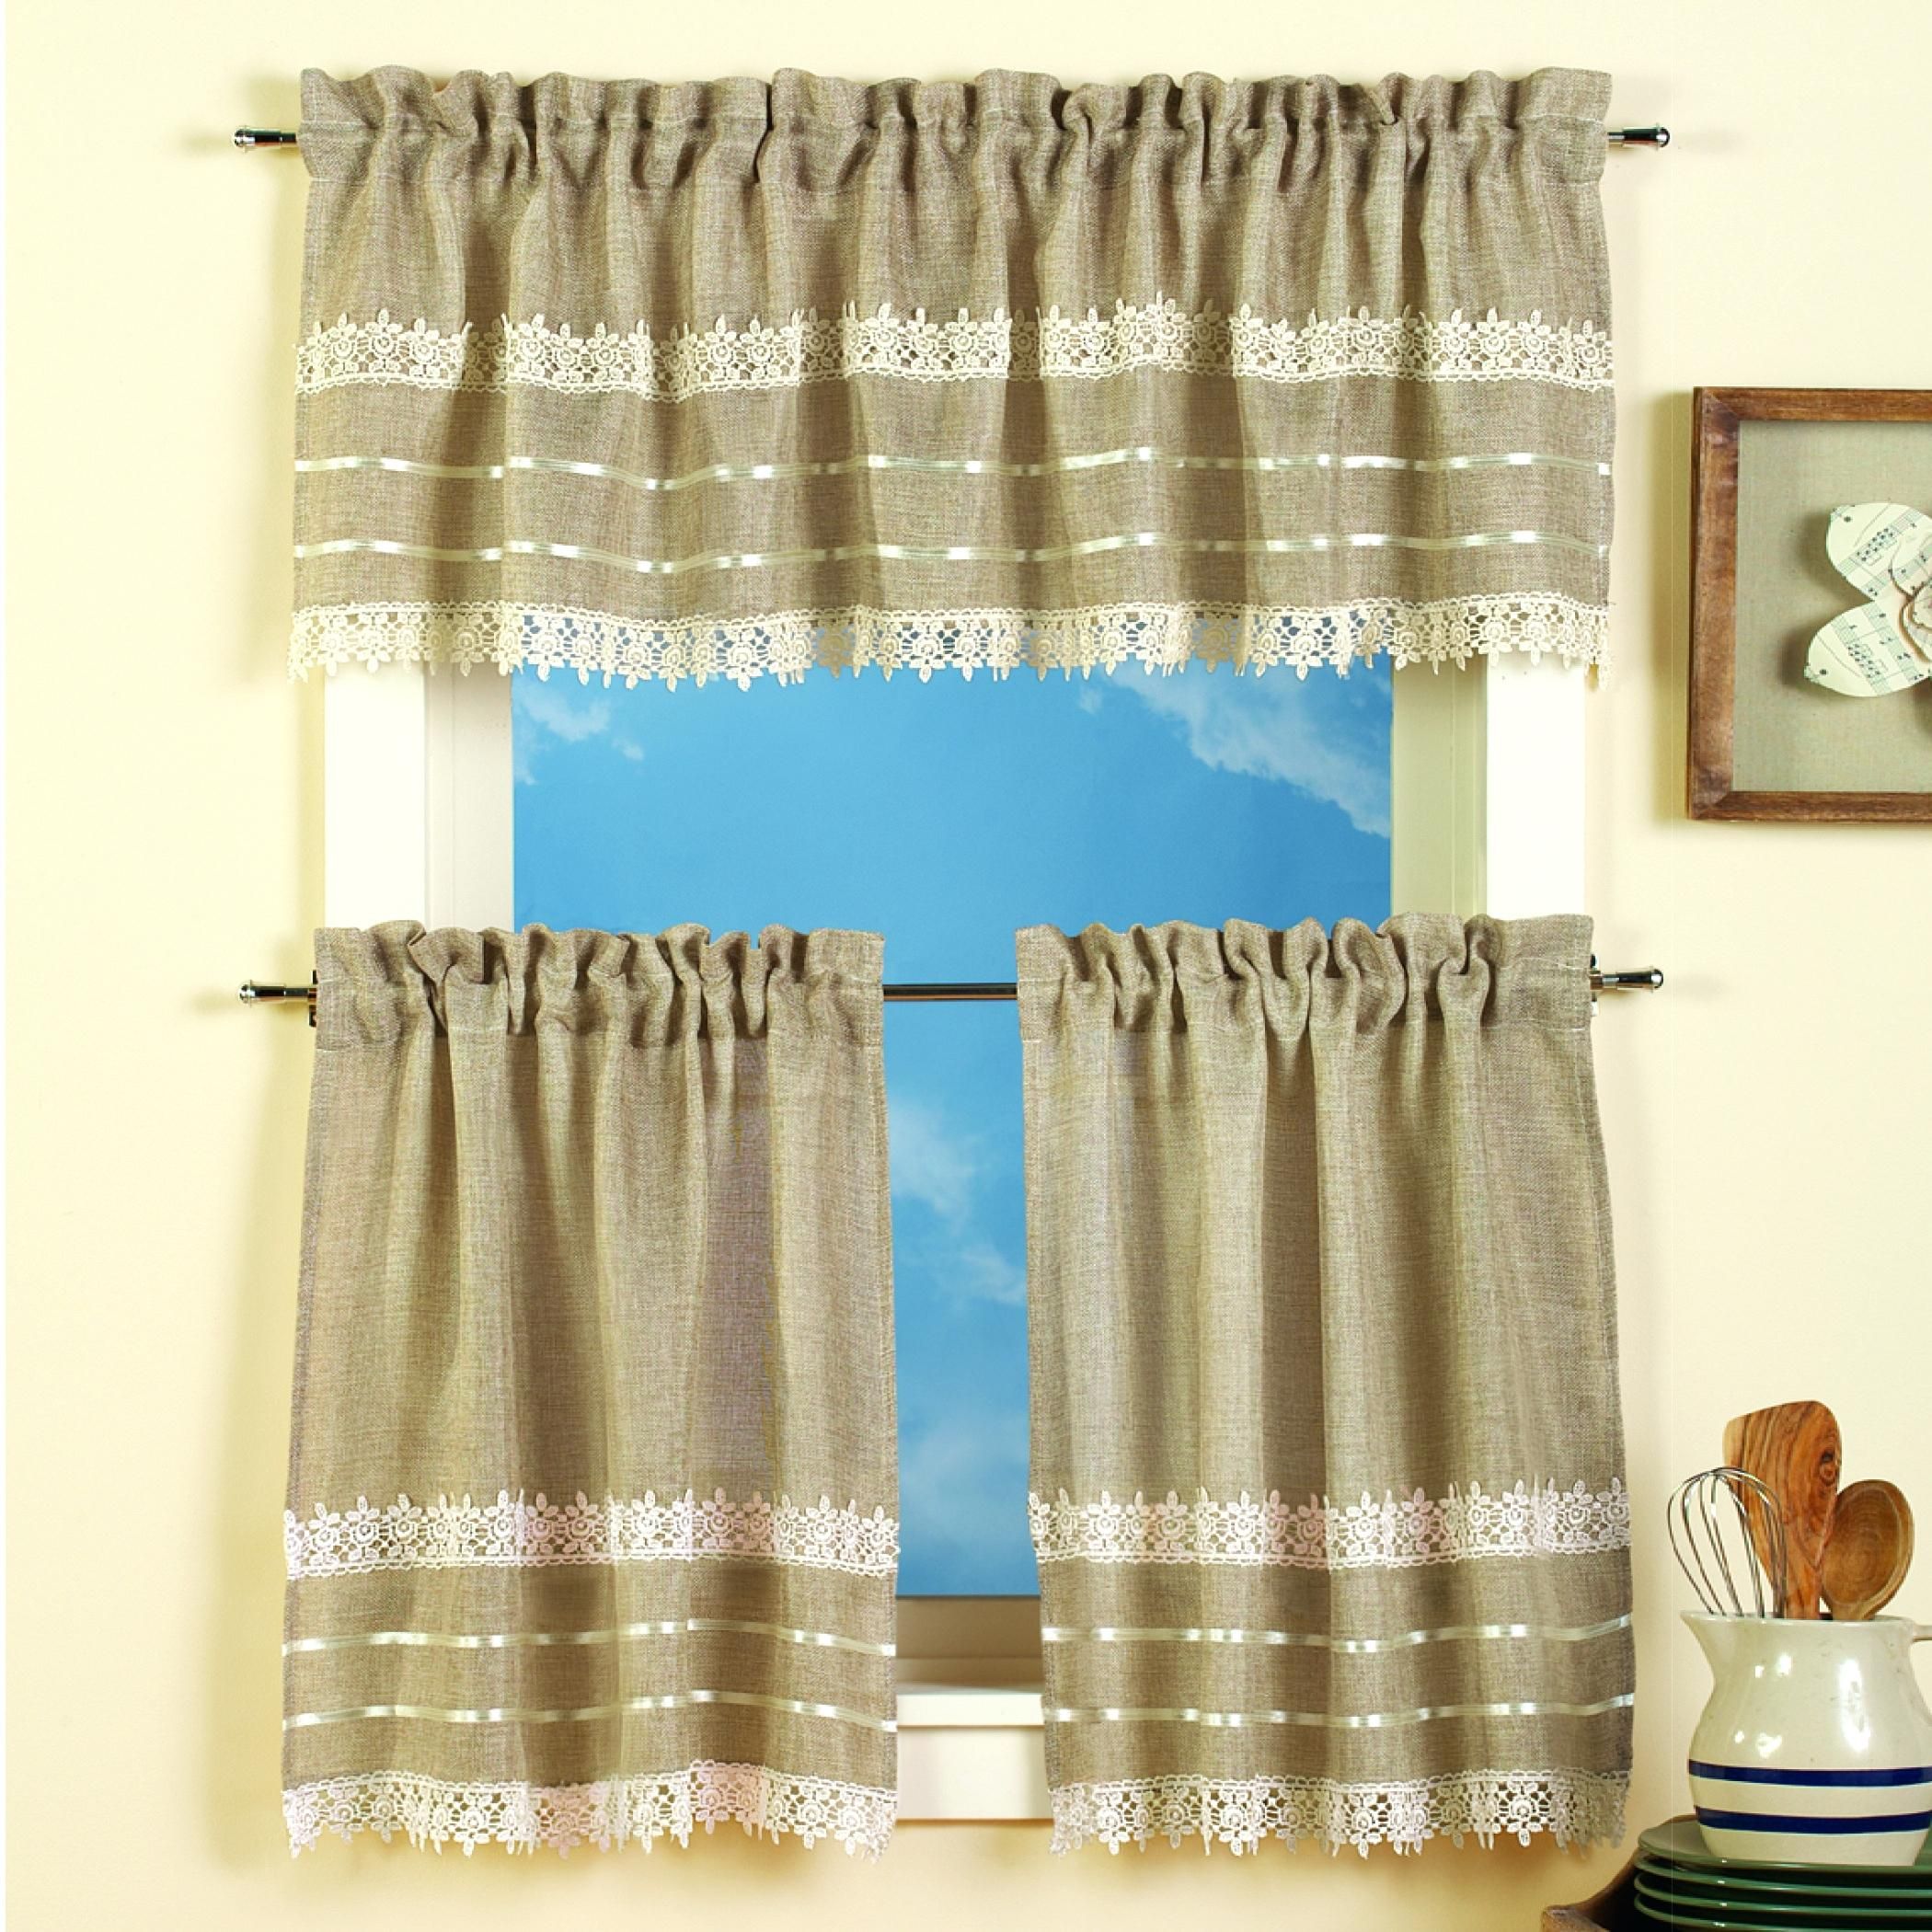 Curtain And Valance Set Throughout Live, Love, Laugh Window Curtain Tier Pair And Valance Sets (Photo 14 of 20)